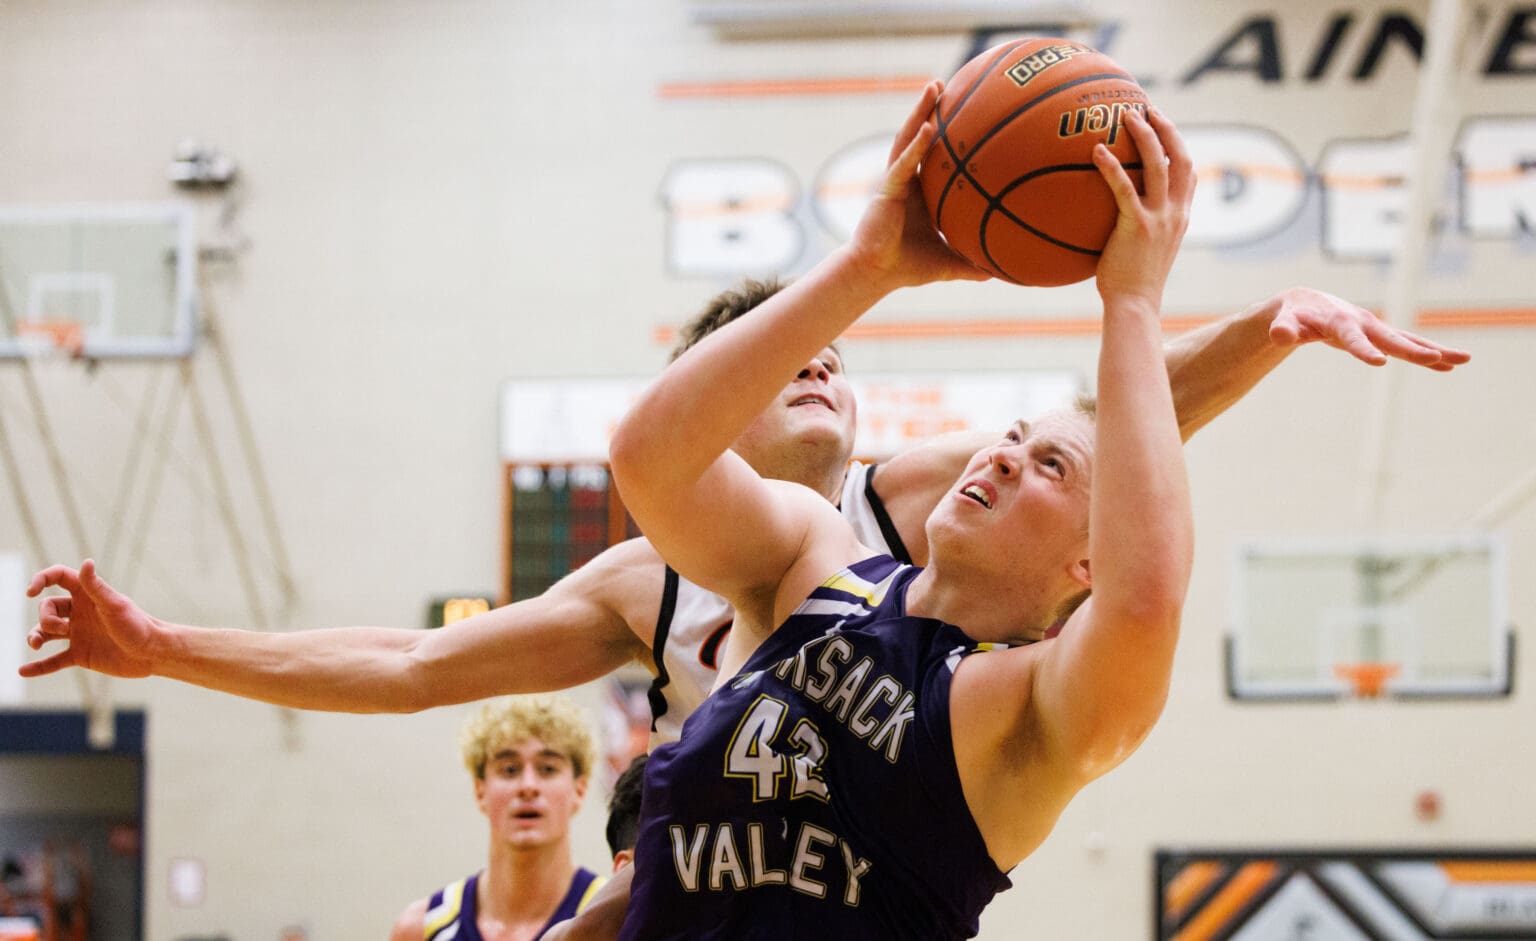 Nooksack Valley's Brady Ackerman is fouled as he puts up a shot Dec. 22